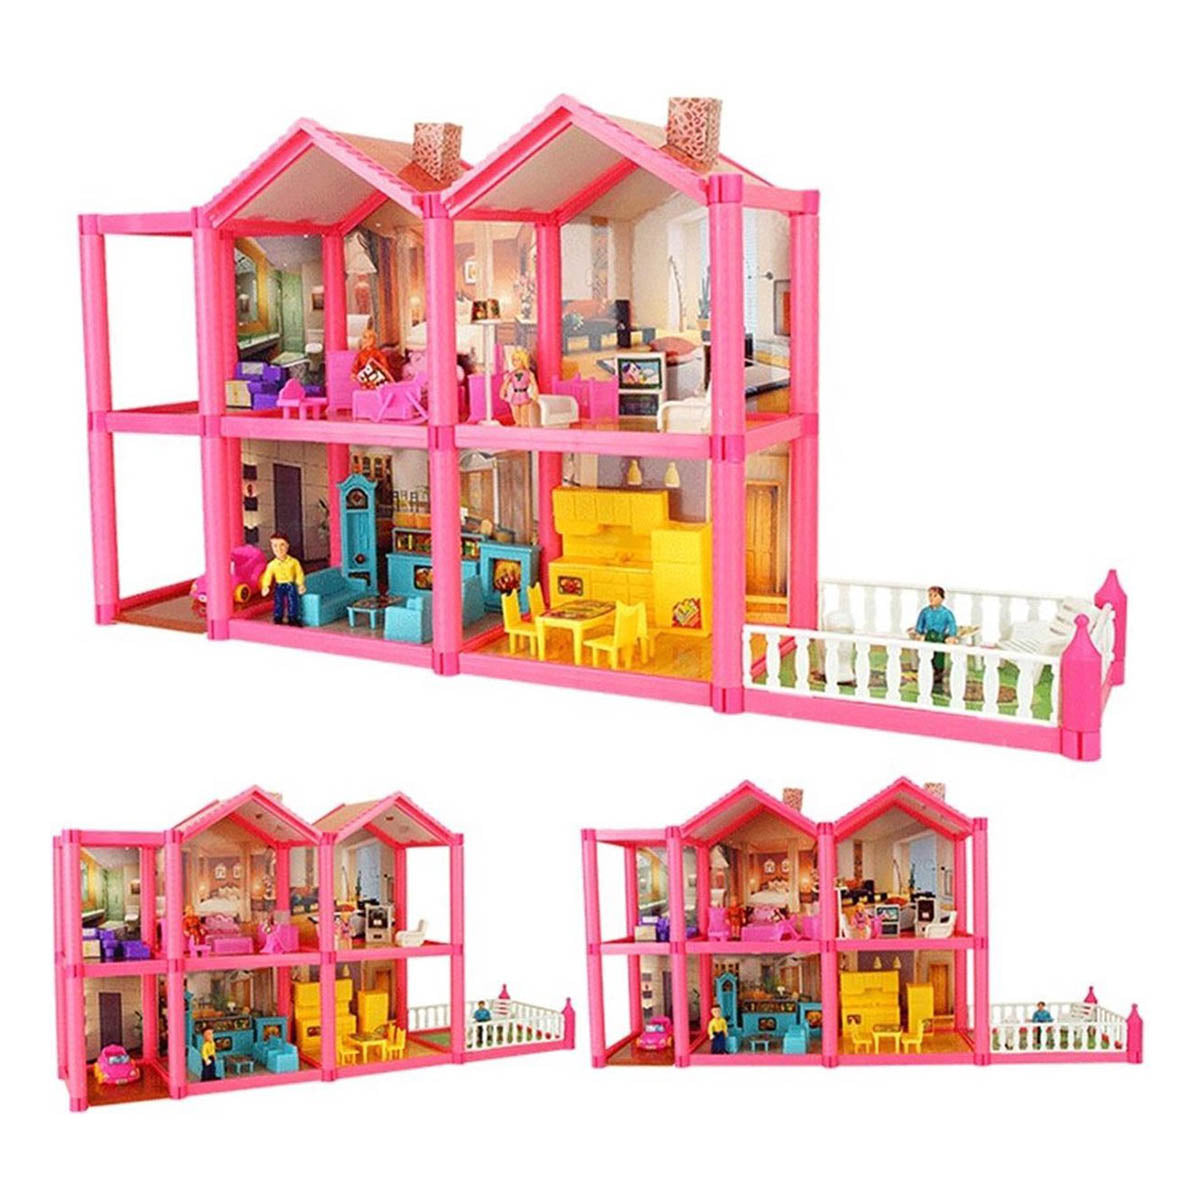 <tc>Ariko</tc> XL Dollhouse | Dream House | 6 rooms and terrace| 136 pieces fully furnished with 4 dolls and 1 dog